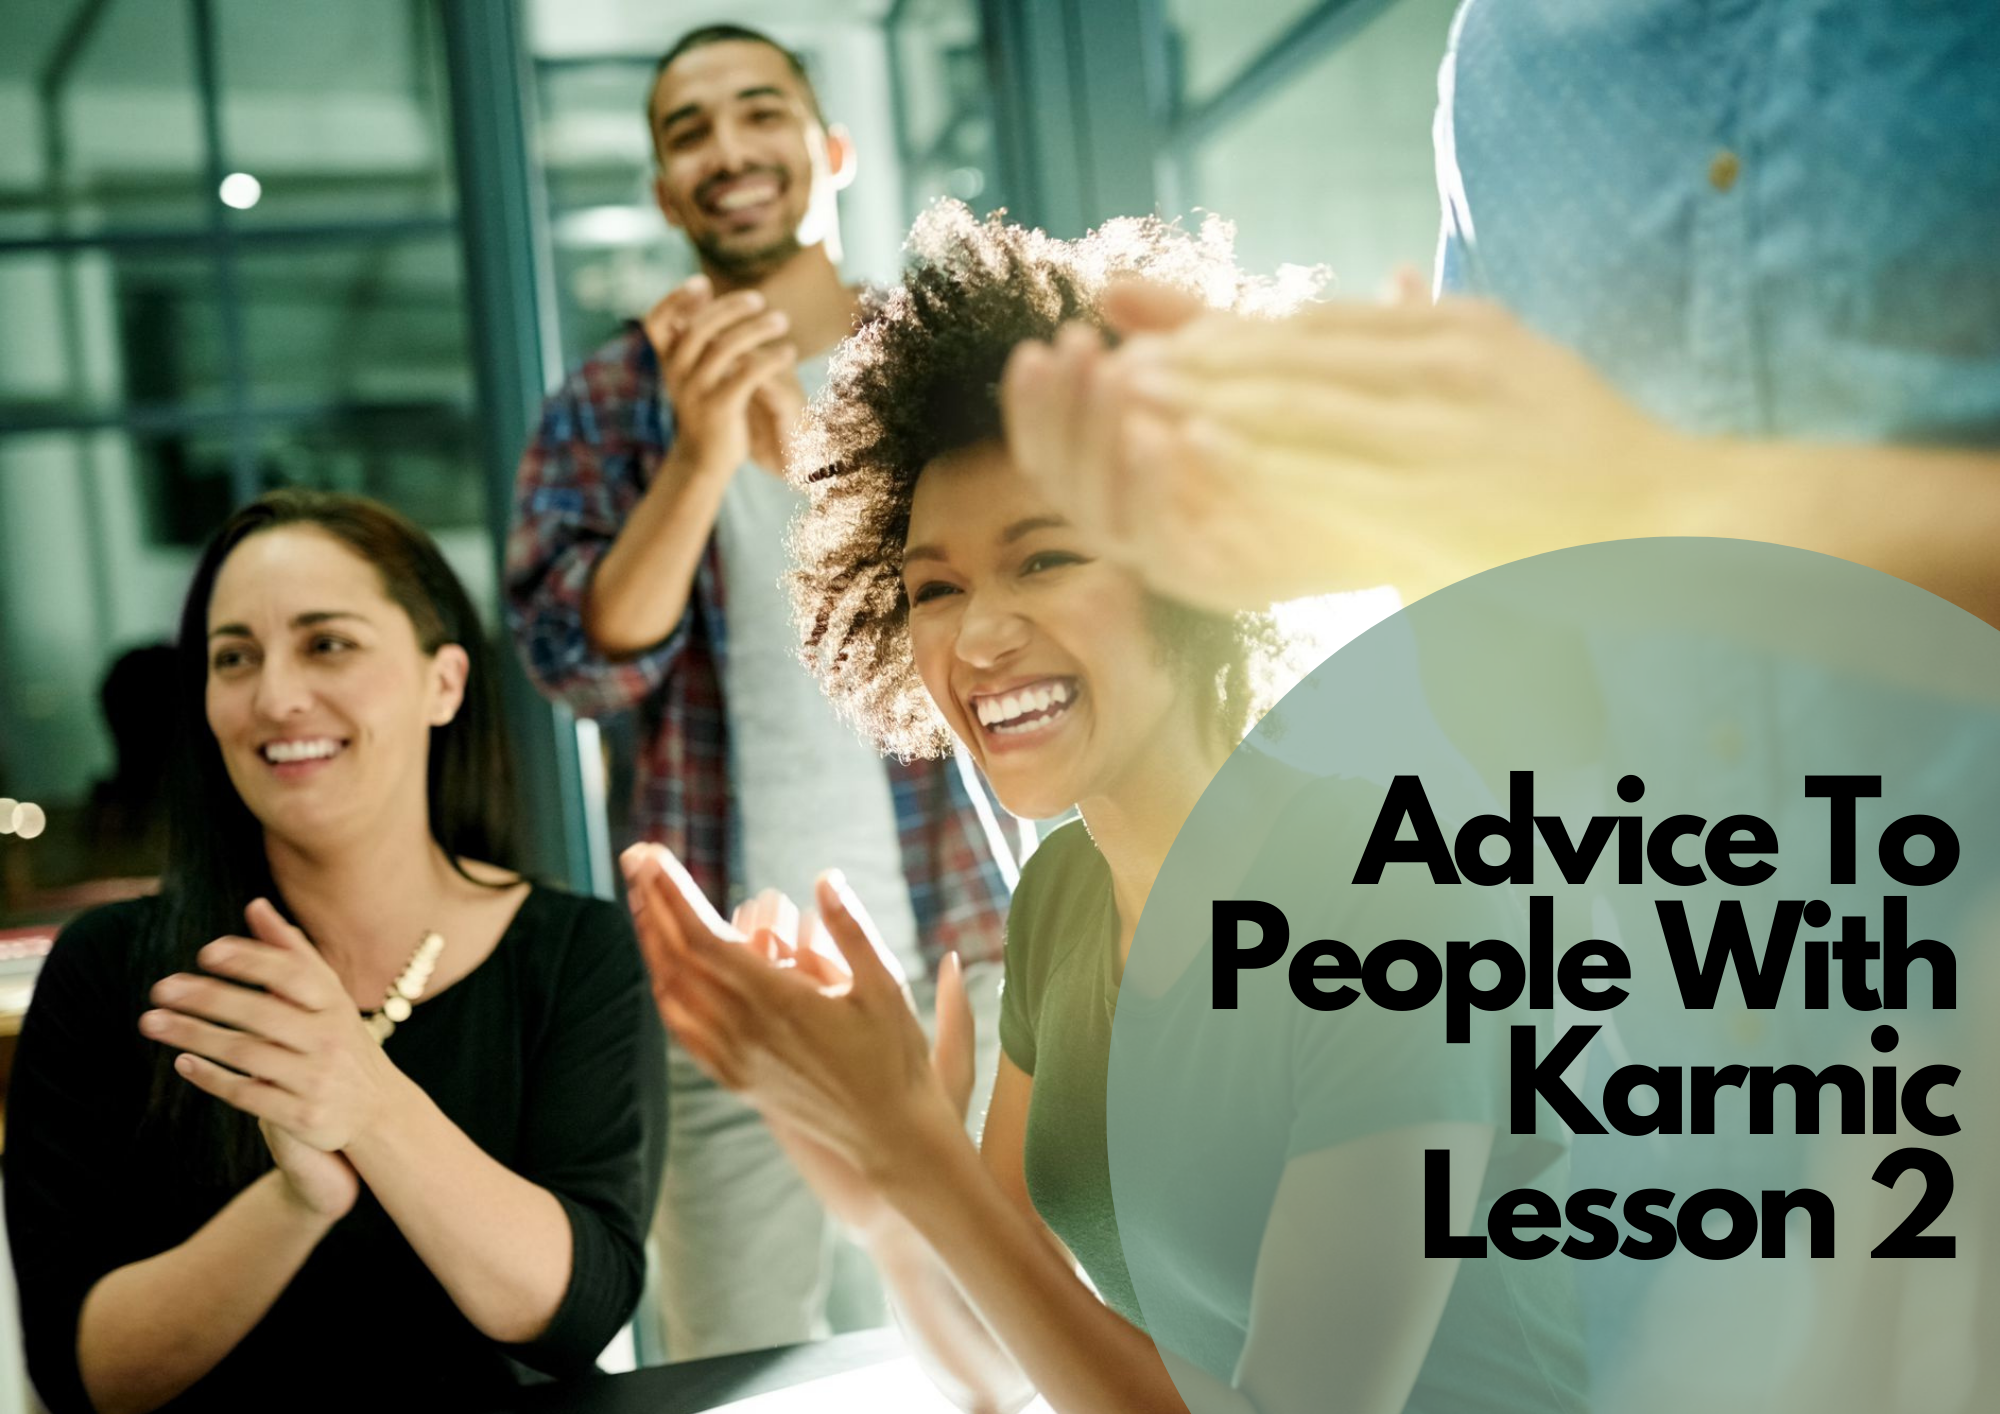 A group of happy people clapping their hands with words Advice To People With Karmic Lesson 2